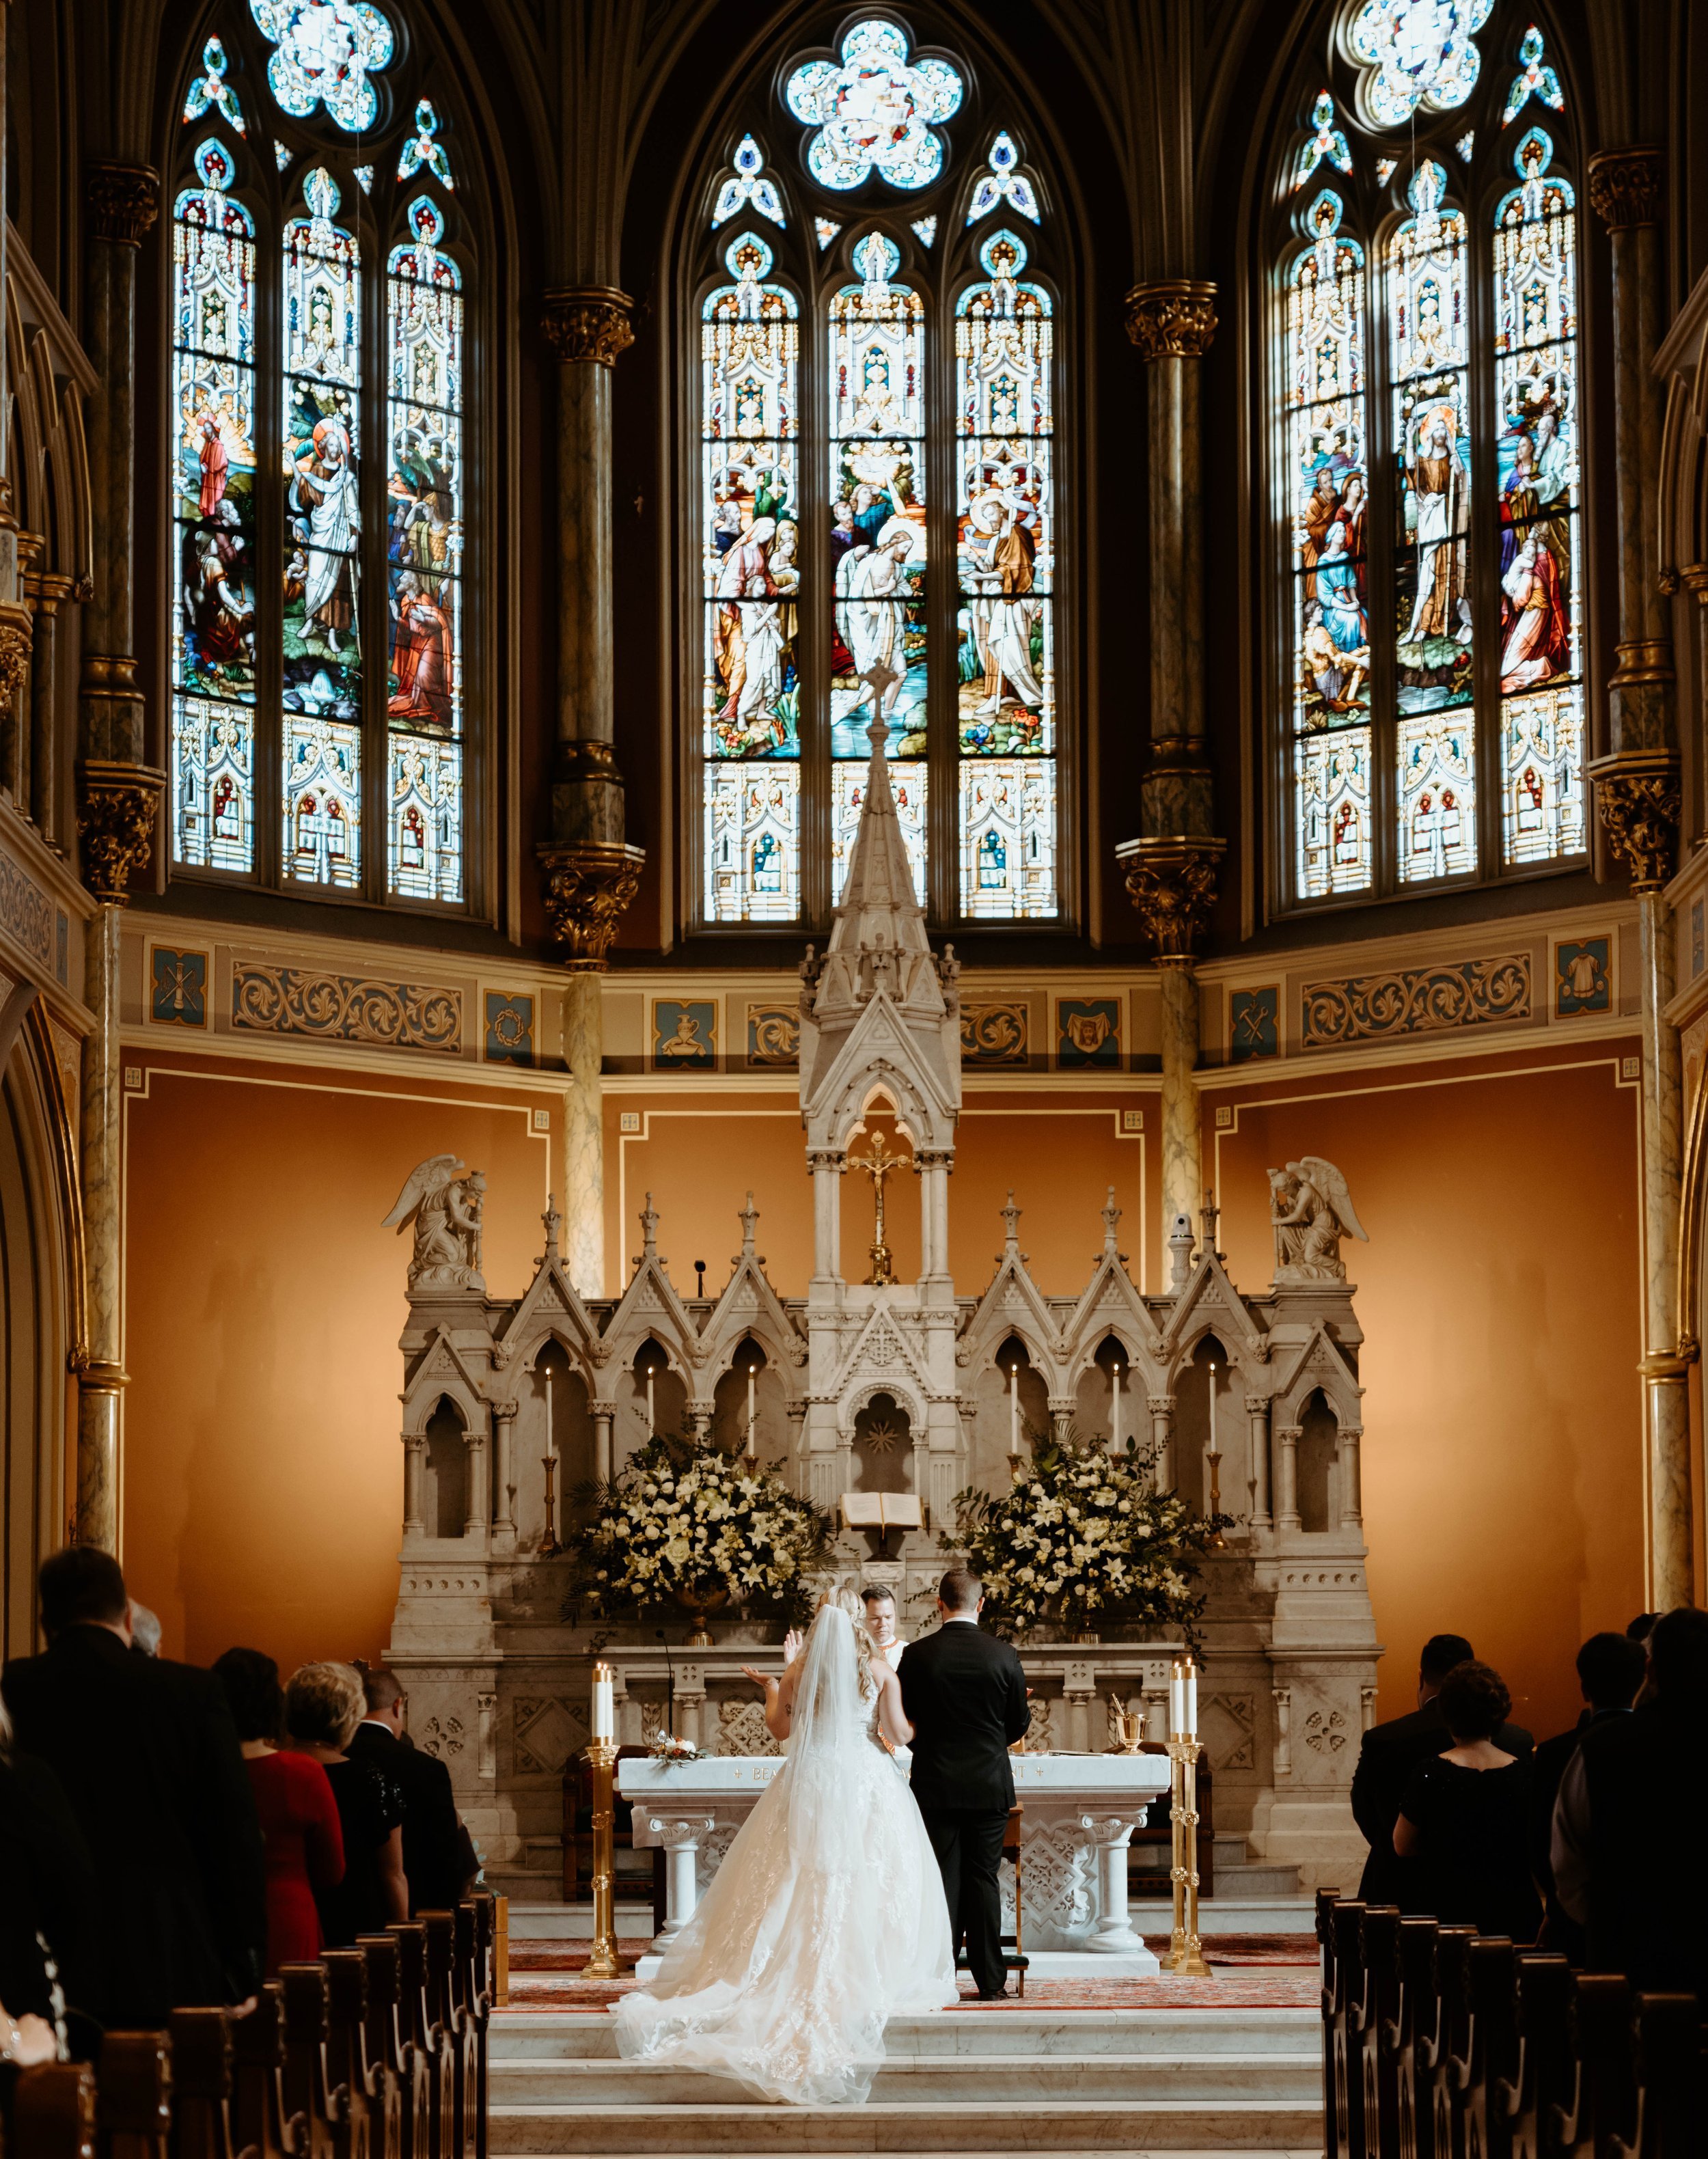 Ivory-and-beau-bride-ansley-bought-sparkly-and-traditional-highneck-ballgown-at-savannah-bridal-shop-gets-married-at-cathedral-with-the-help-of-ivory-and-beau-who-created-floral-peices-for-the-ceremony-and-reception-in-their-savannah-florwer-shop-39.jpg